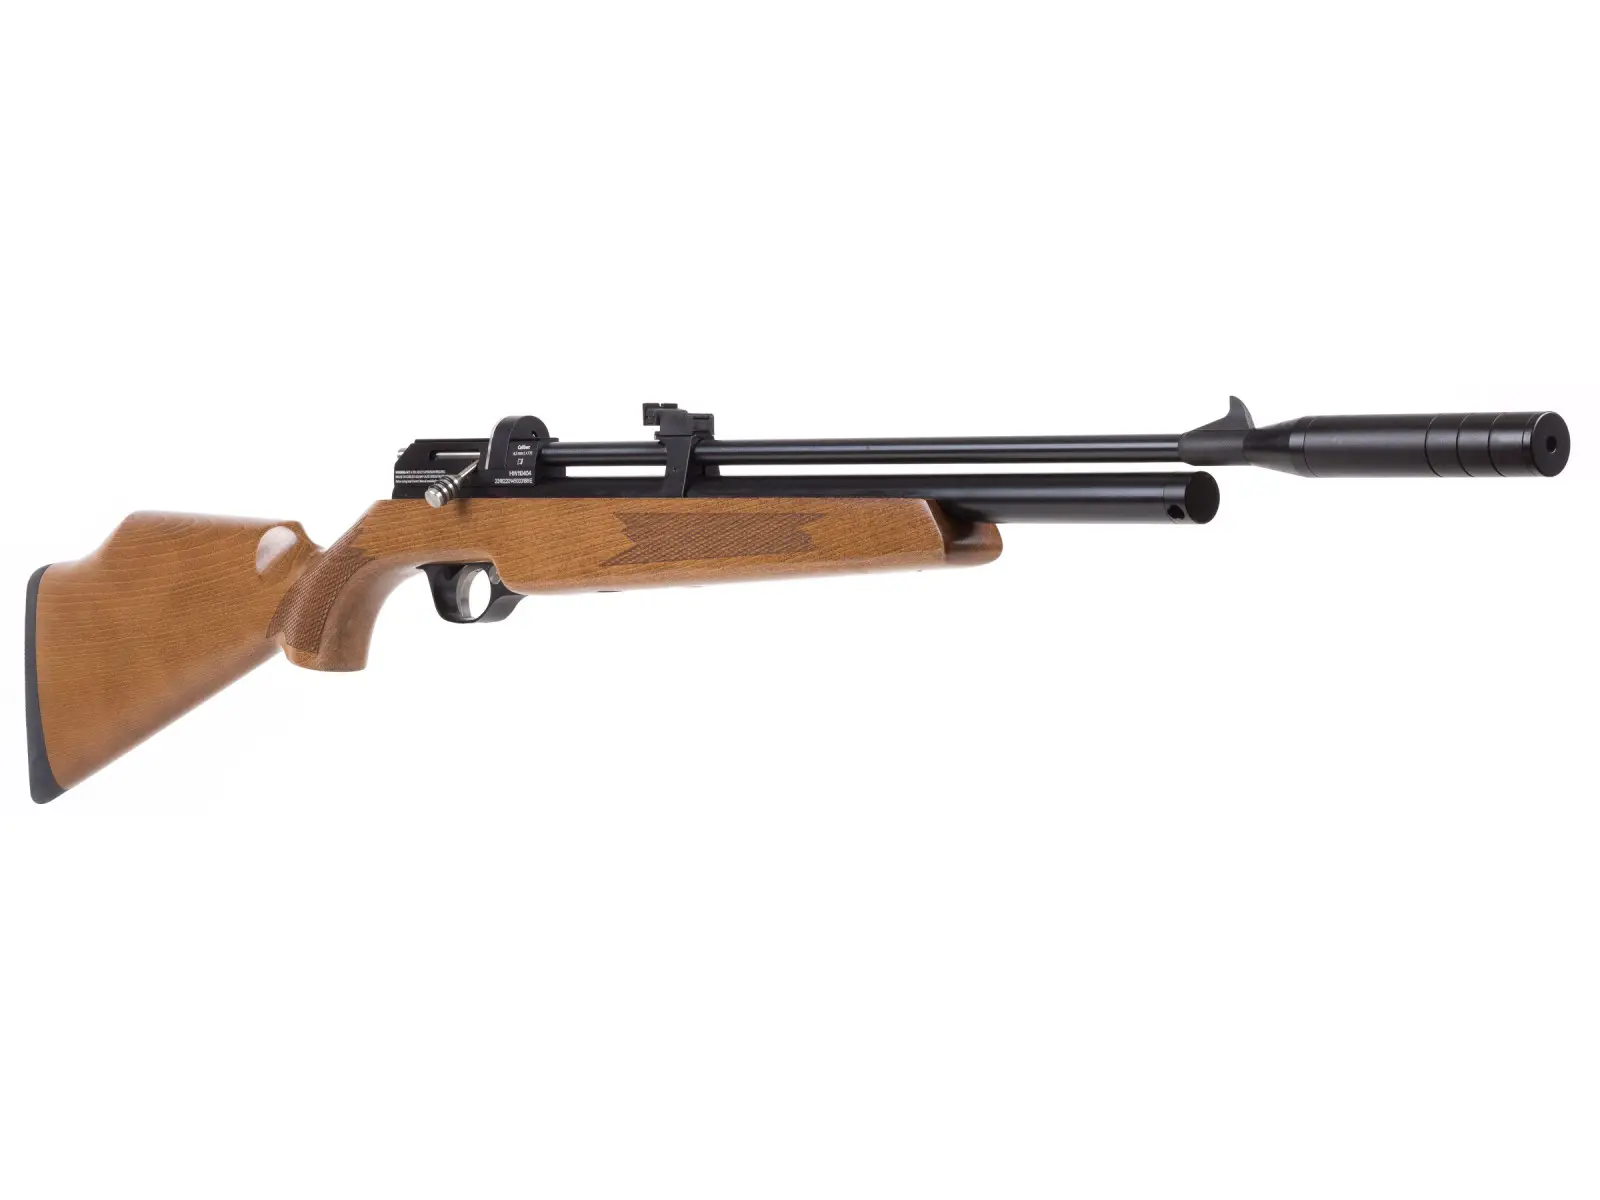 stormrider Best .22 Air Rifles - Top 11 fantastic guns for the money (Reviews and Buying Guide 2022)